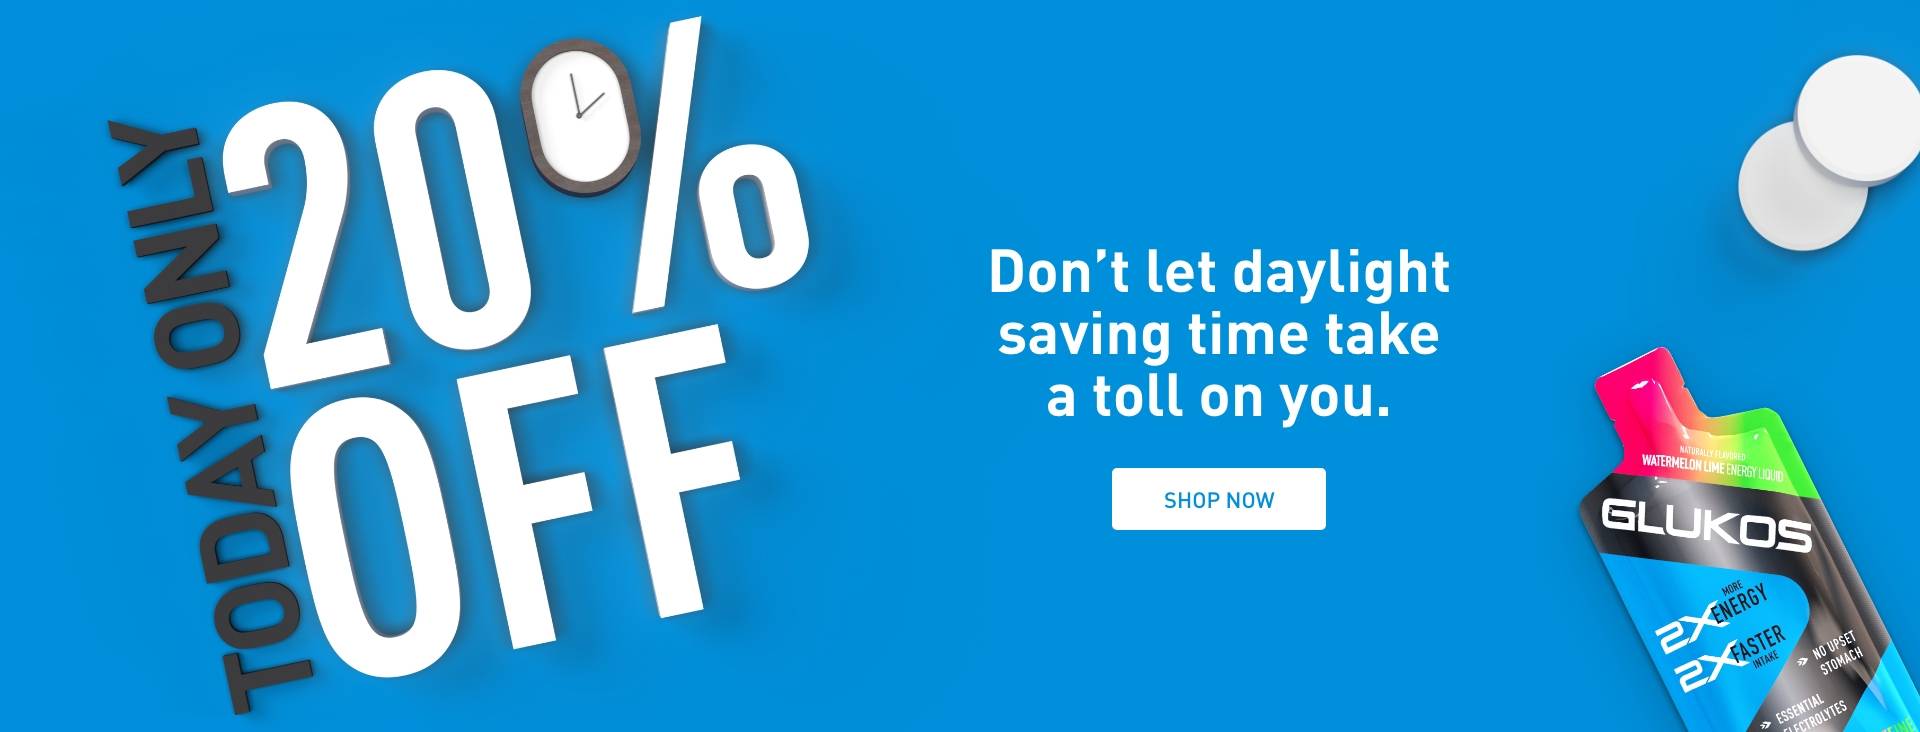 Today only. 20% off. Don't let daylight saving time take a toll on you. SHOP NOW